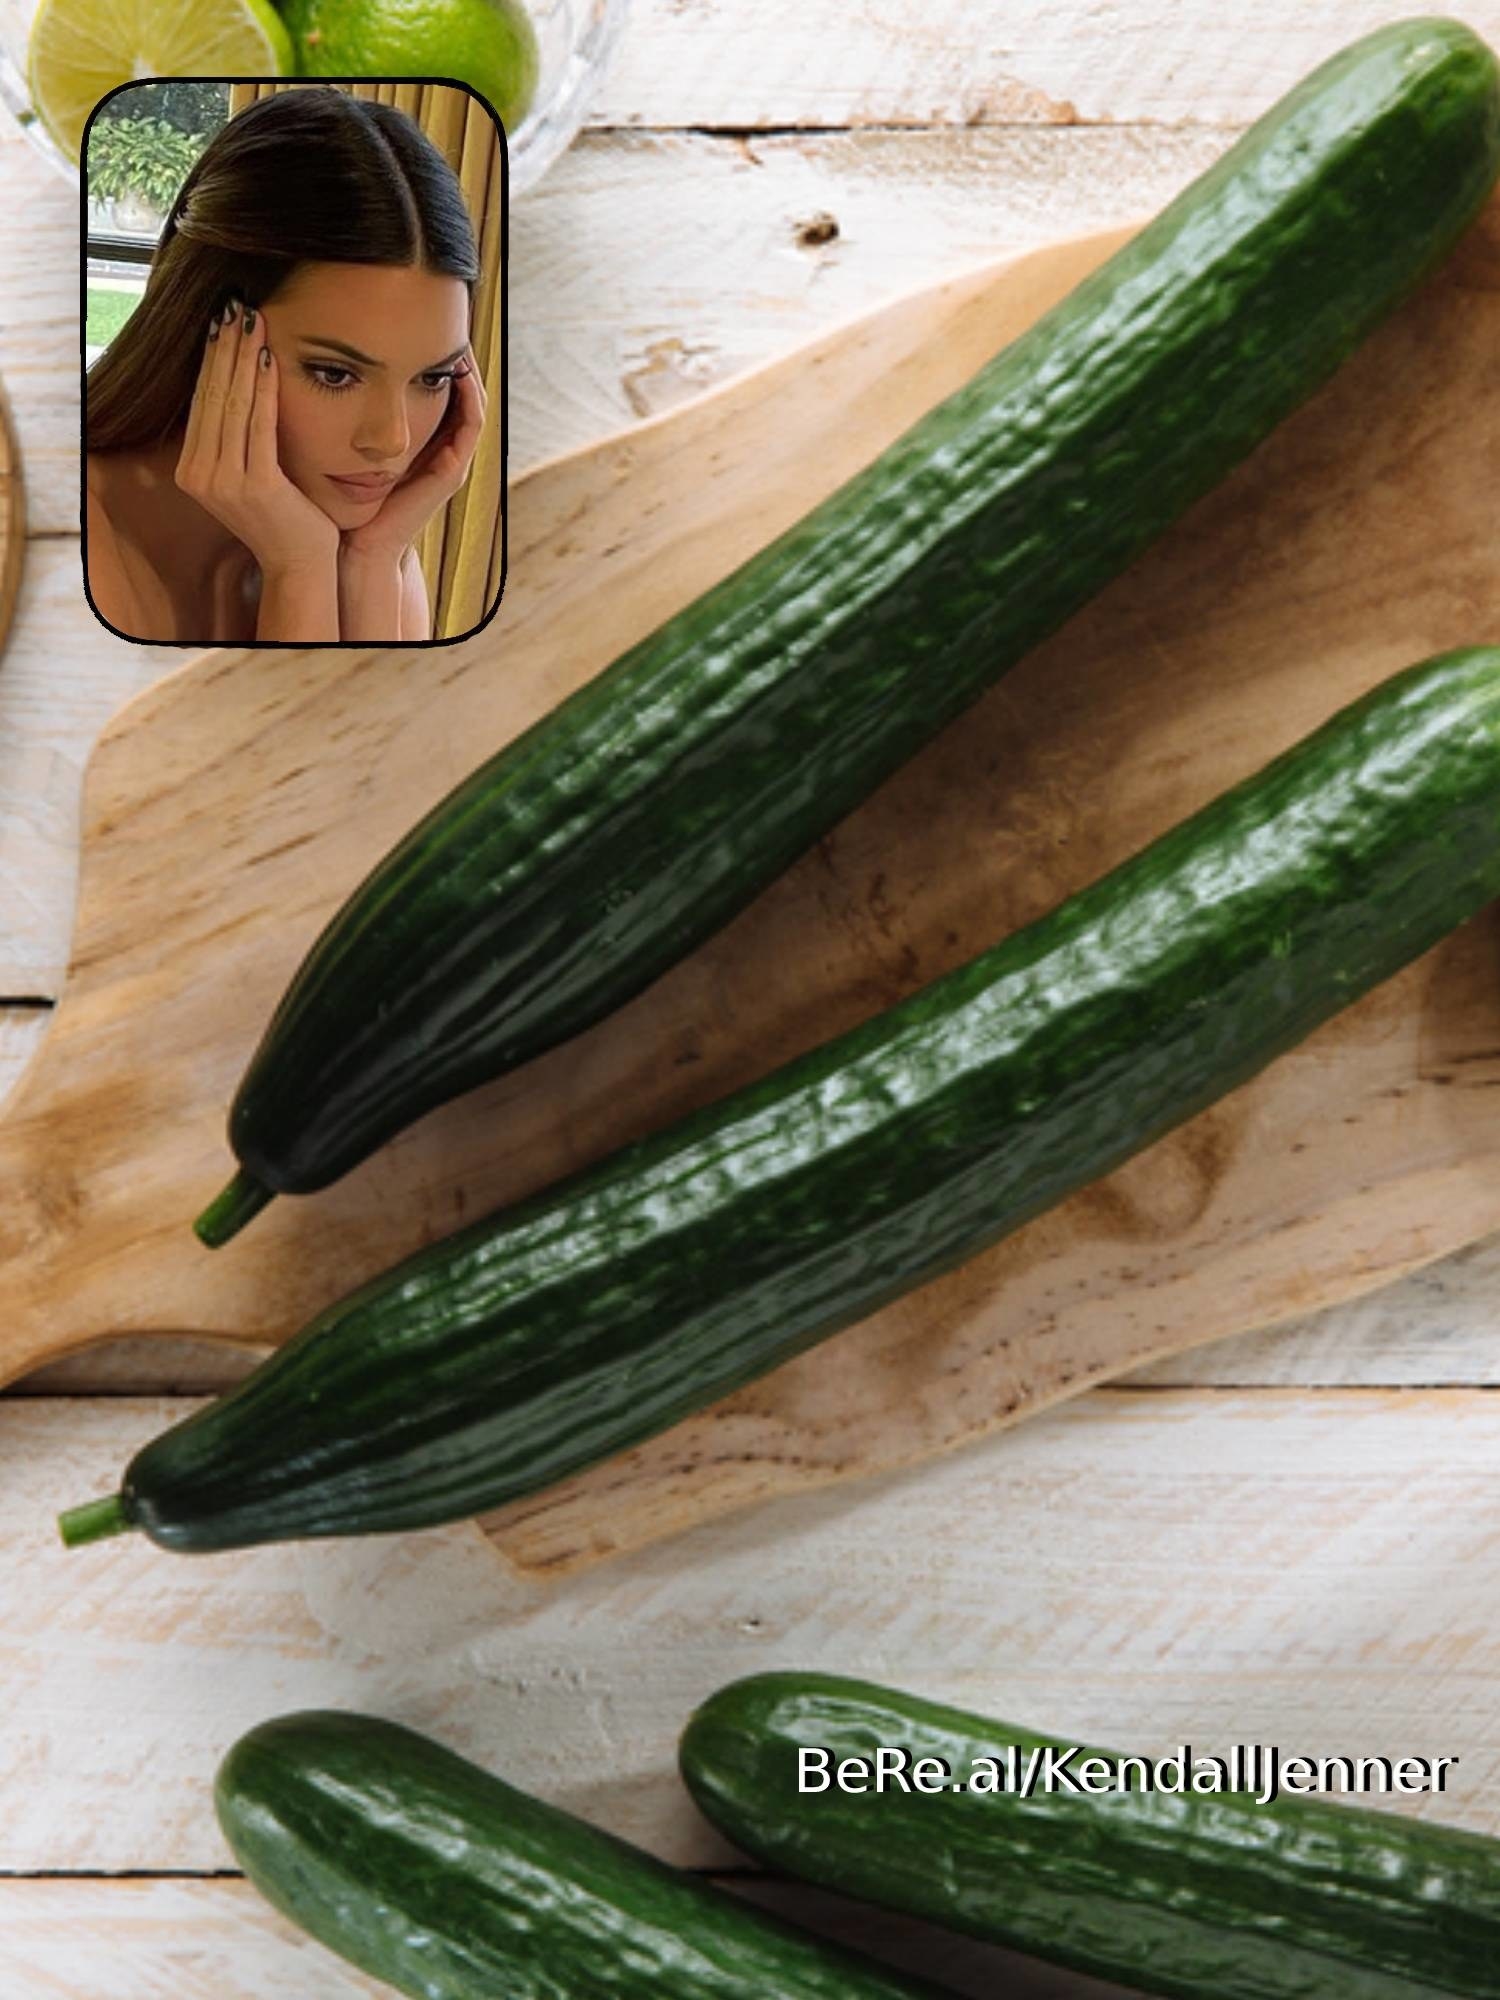 Kendall Jenner sitting with her chin in her hands, intensely looking at cucumbers on a cutting board